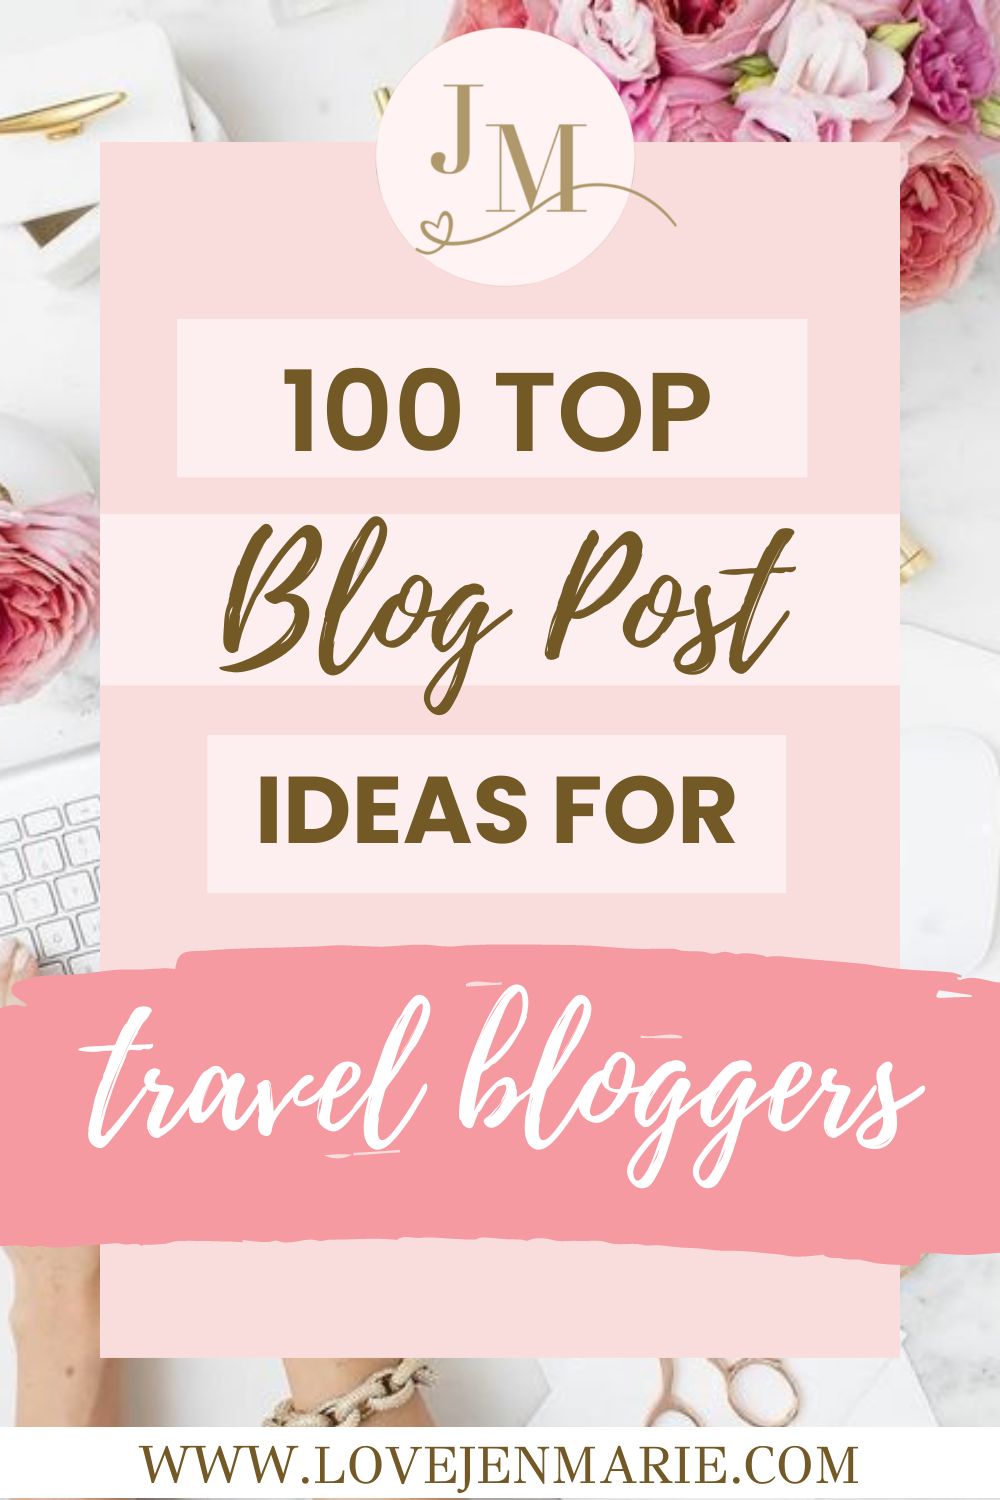 The Best Blog Topics for Travel Bloggers to learn for starting your own travel blog and how to make money while traveling, make money as a travel blogger, how to start a money making blog